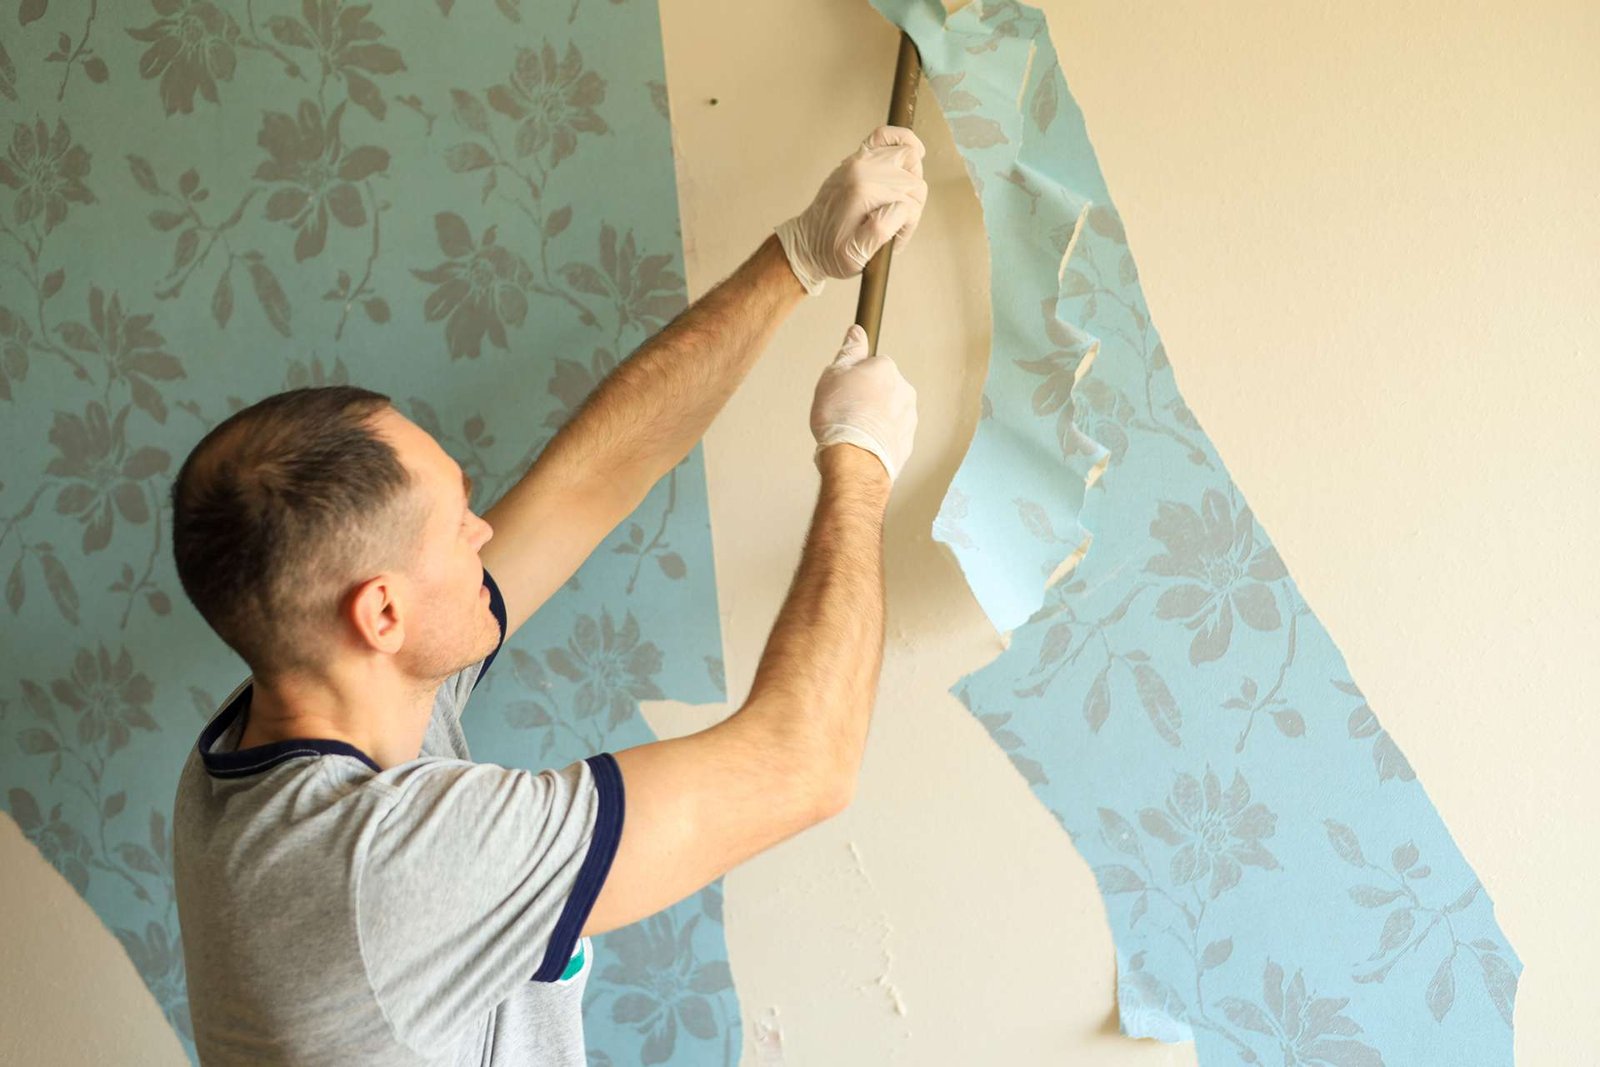 A professional uses a tool to remove blue floral wallpaper from an interior wall